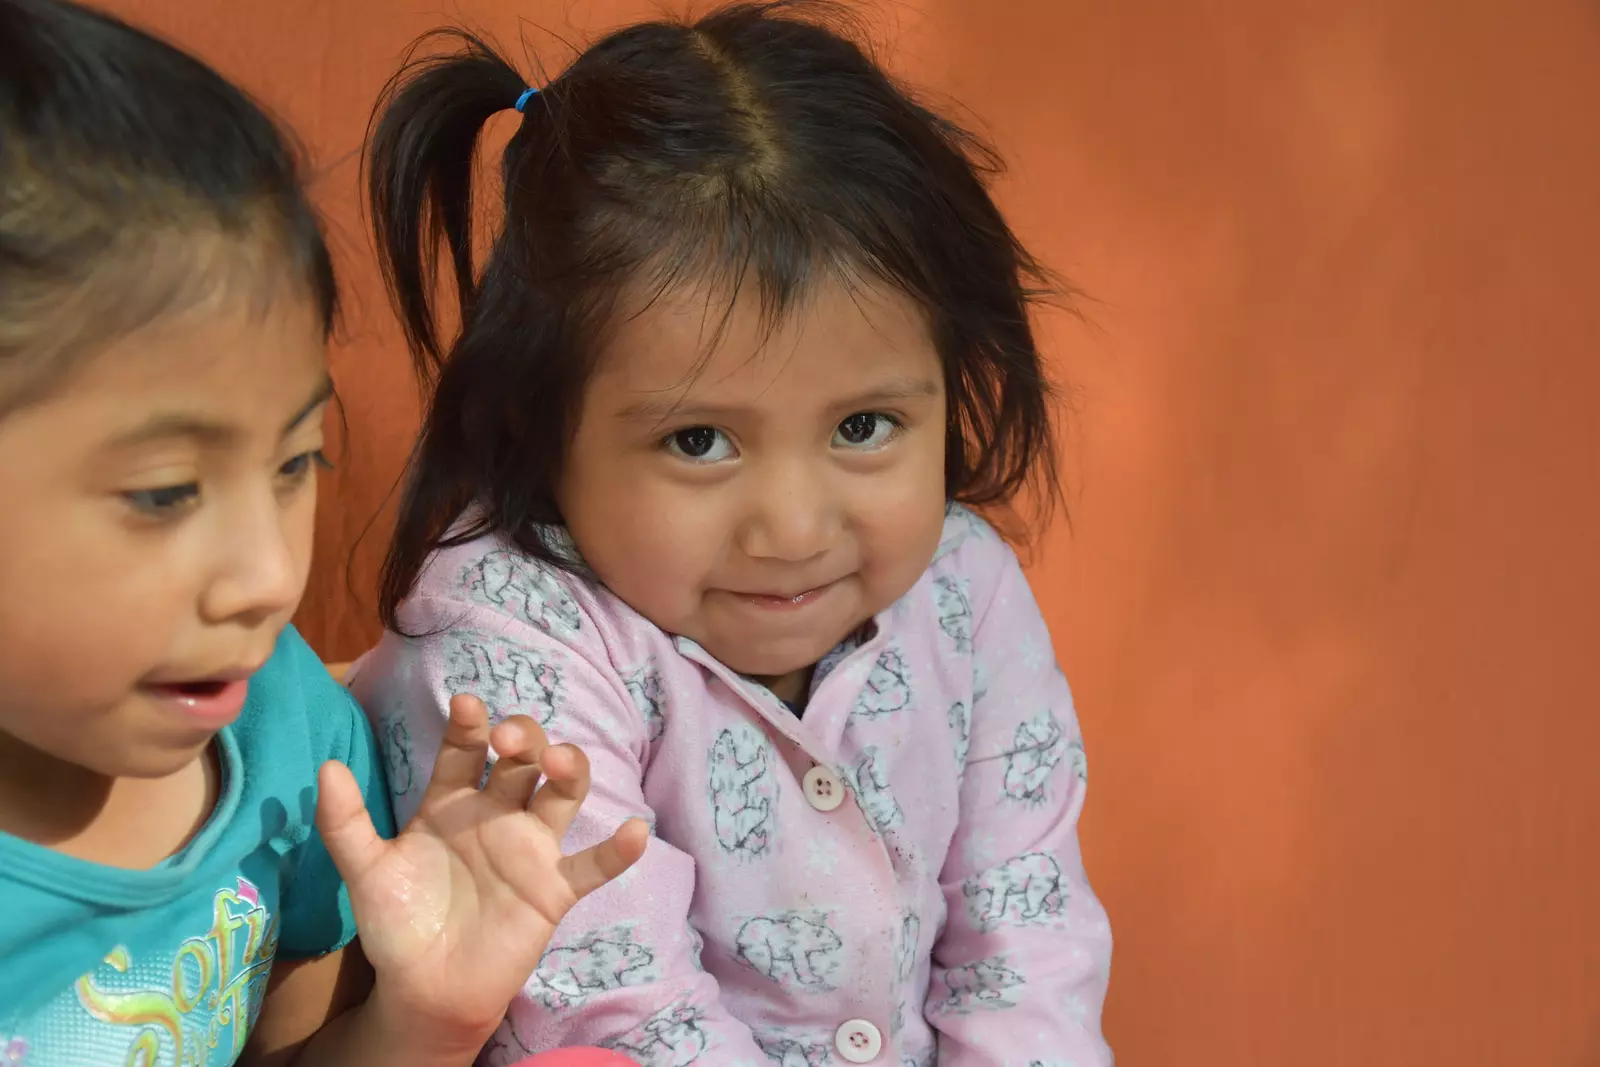 A Guatemalan girl tries stifle a smile when looking into the camera.